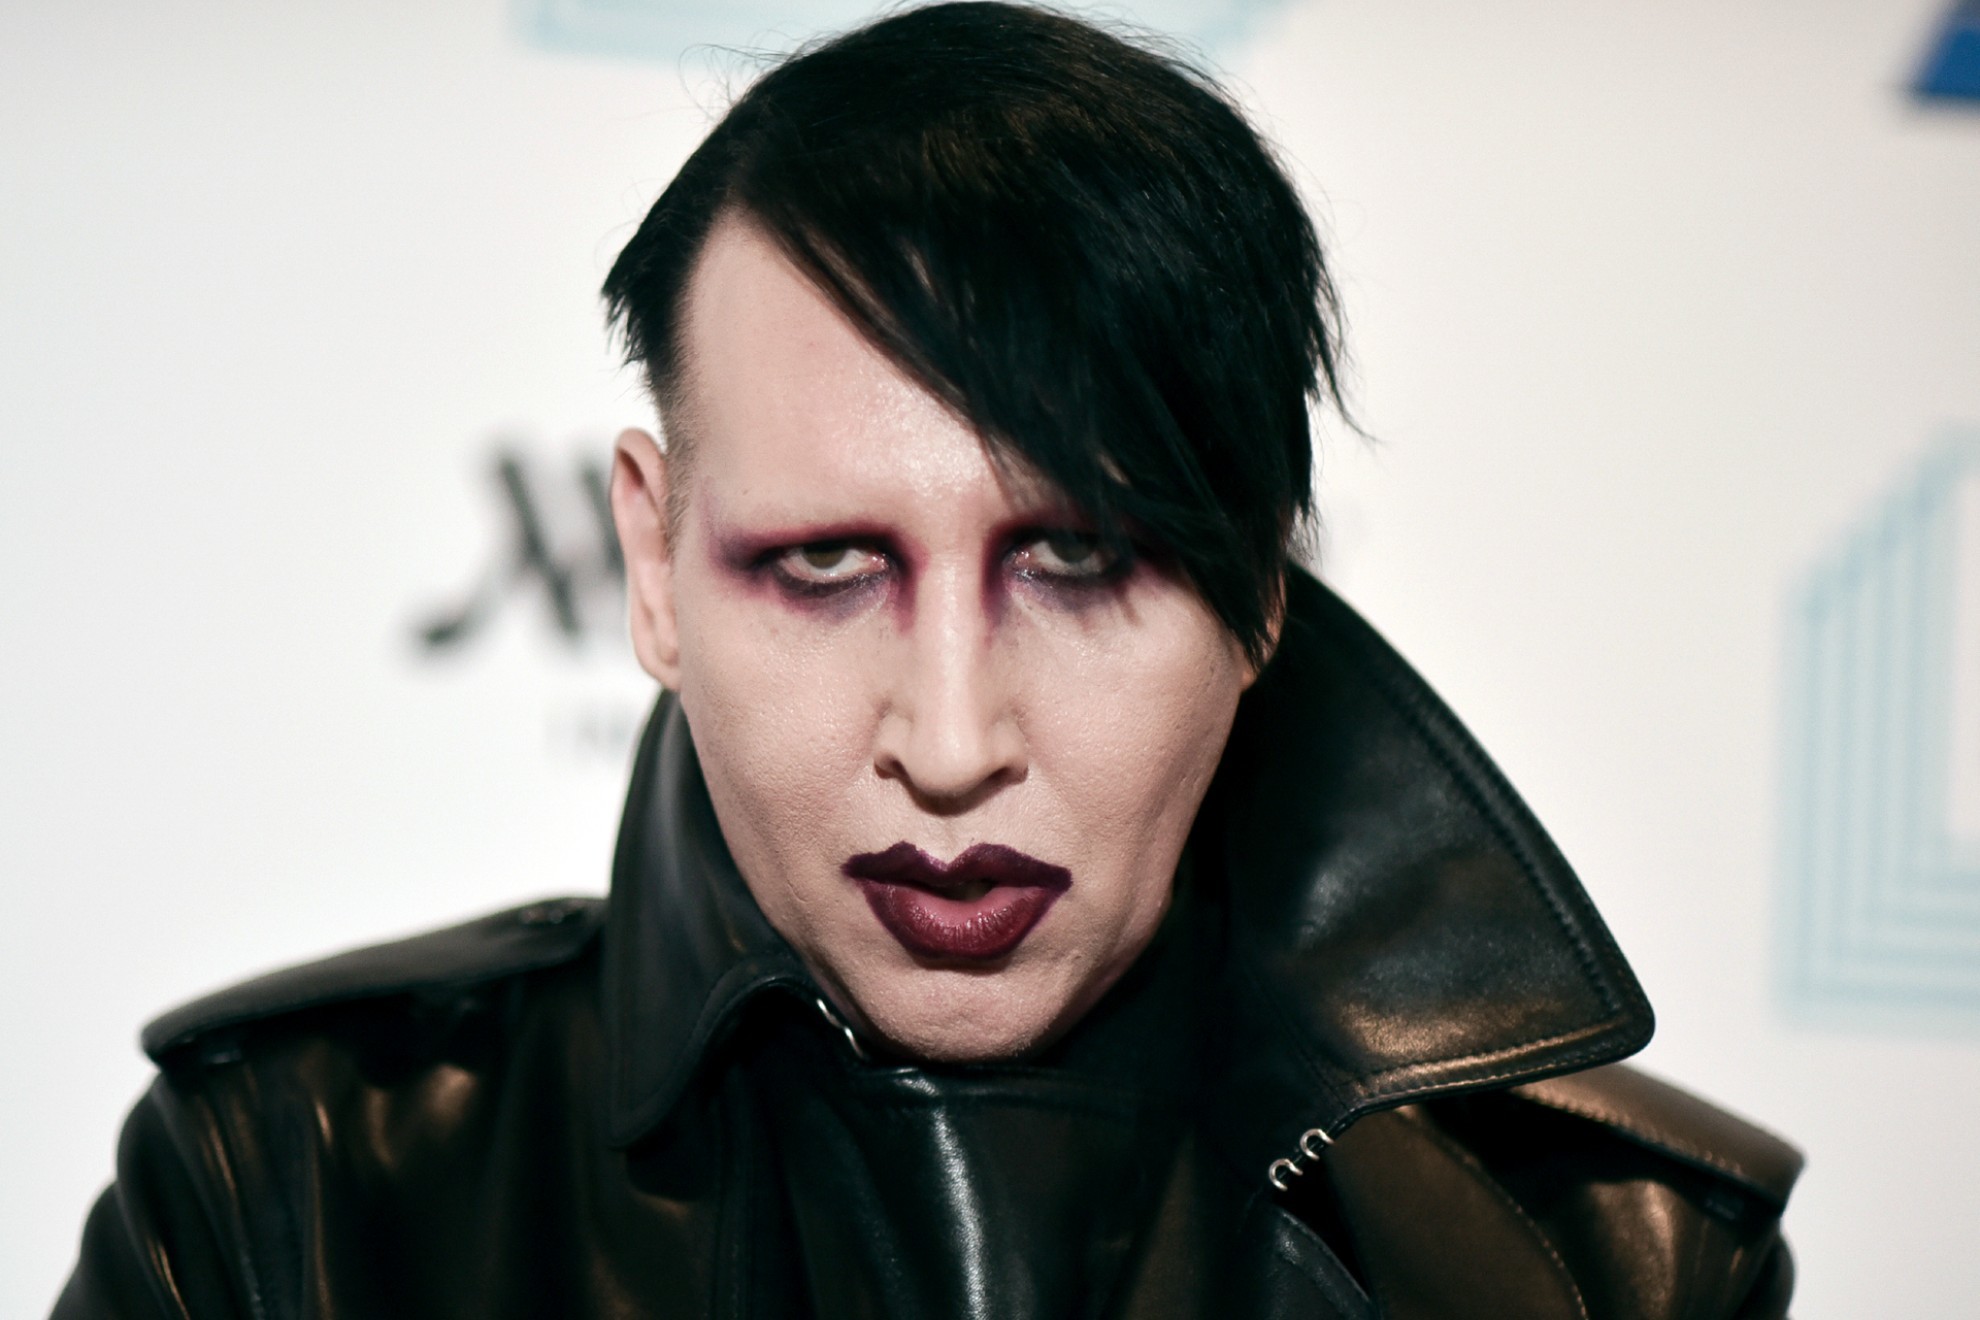 Marilyn Manson attends the 9th annual "Home for the Holidays" benefit concert in Los Angeles.